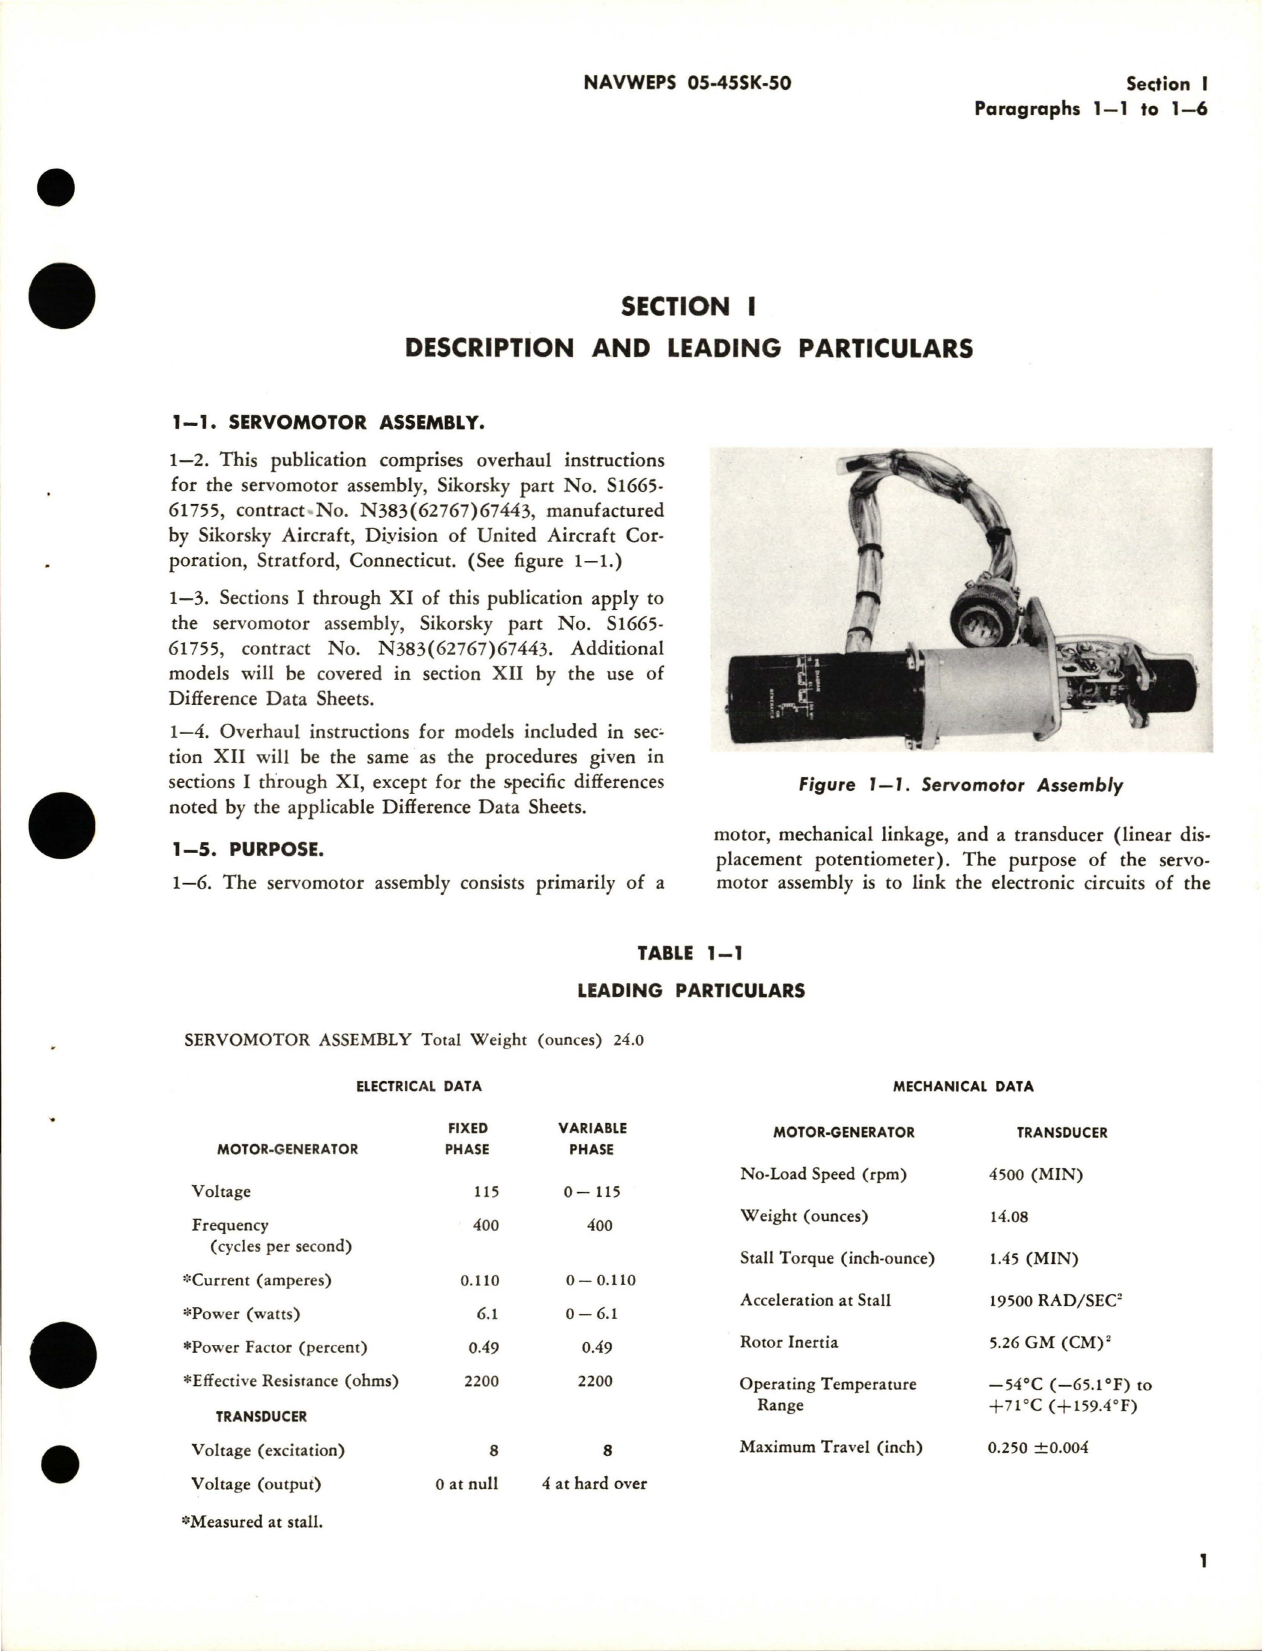 Sample page 7 from AirCorps Library document: Overhaul Instructions for Servomotor Assembly - Parts S1665-61755 and S1665-61755-4